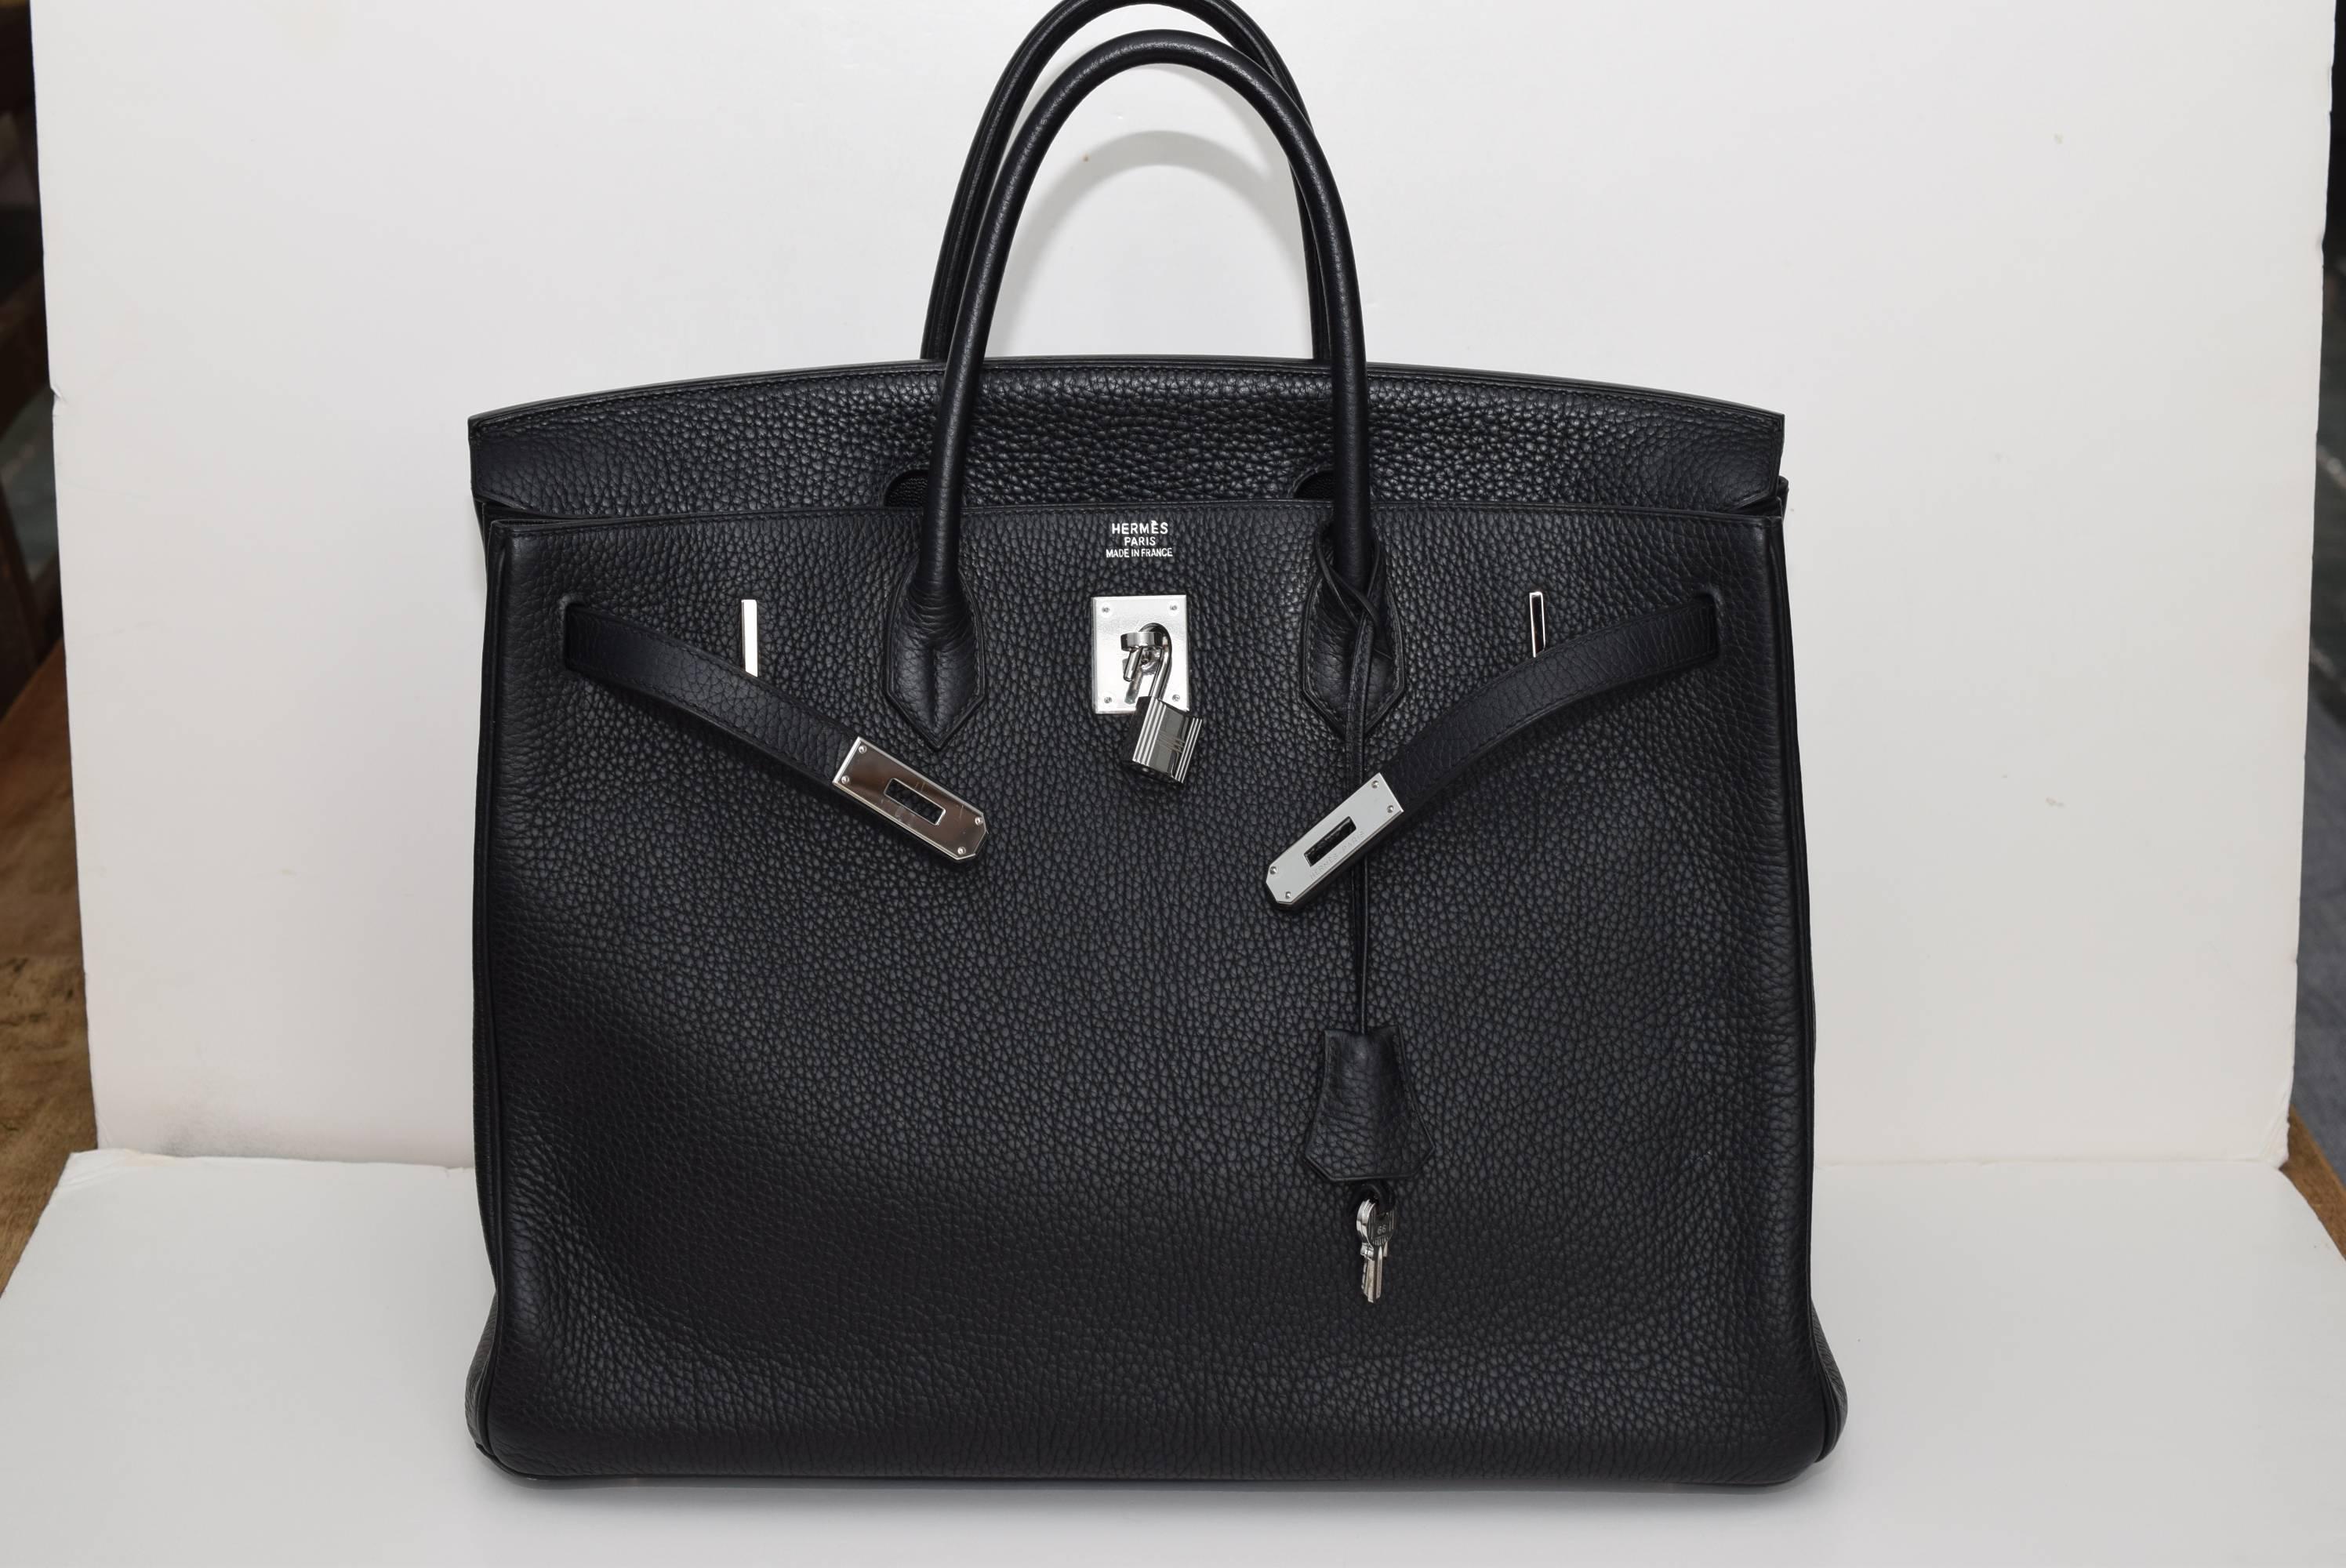 Hermes Birkin 40cm in Black Togo leather with palladium hardware. This bag was purchased on Madison Ave in NYC. It comes with the original receipt.   Barely worn, this Hermes Birkin is truly a staple of success and trend.
I Square (from 2005) Comes